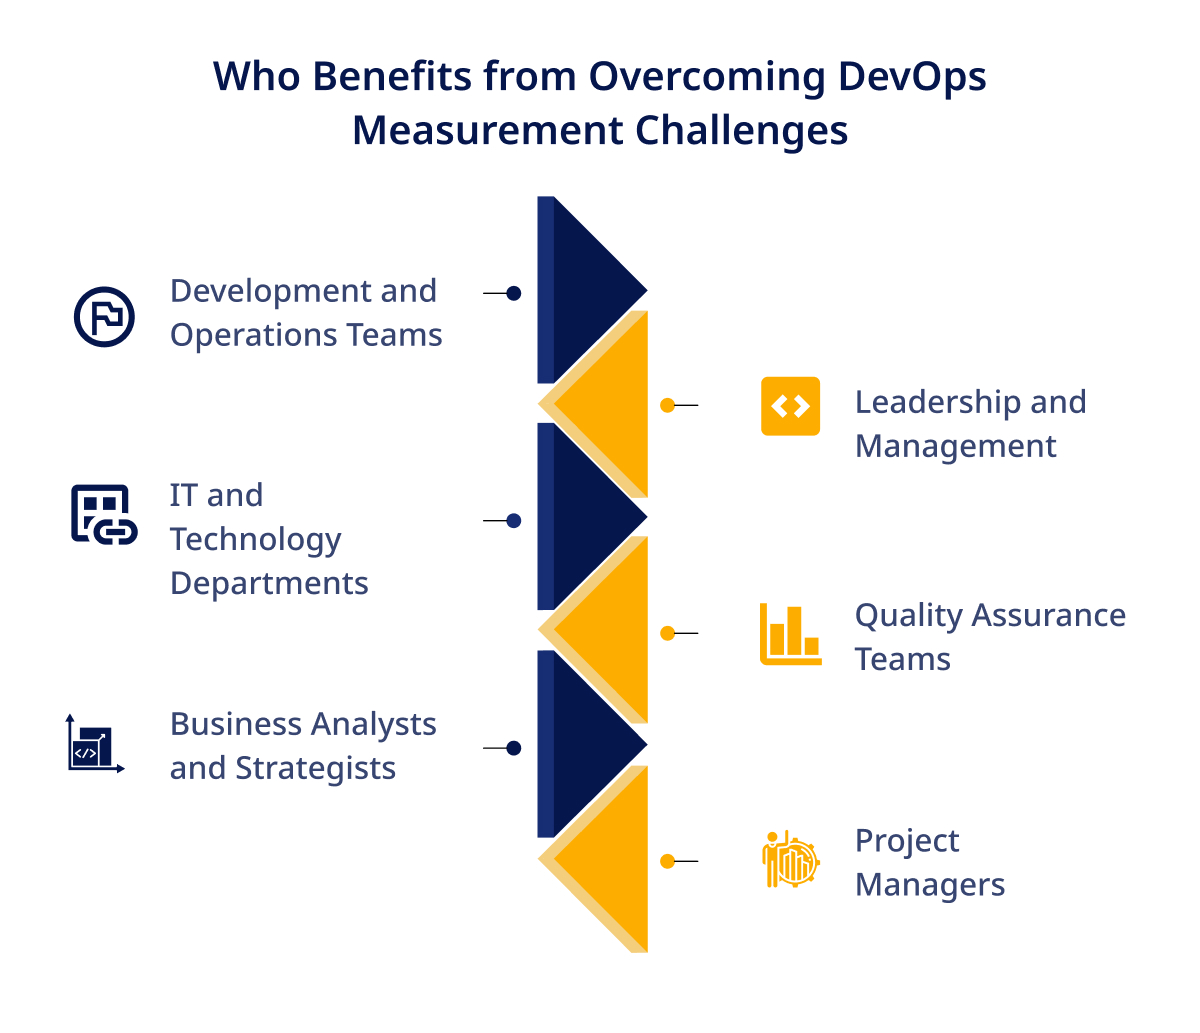 Who Benefits from Overcoming DevOps Measurement Challenges